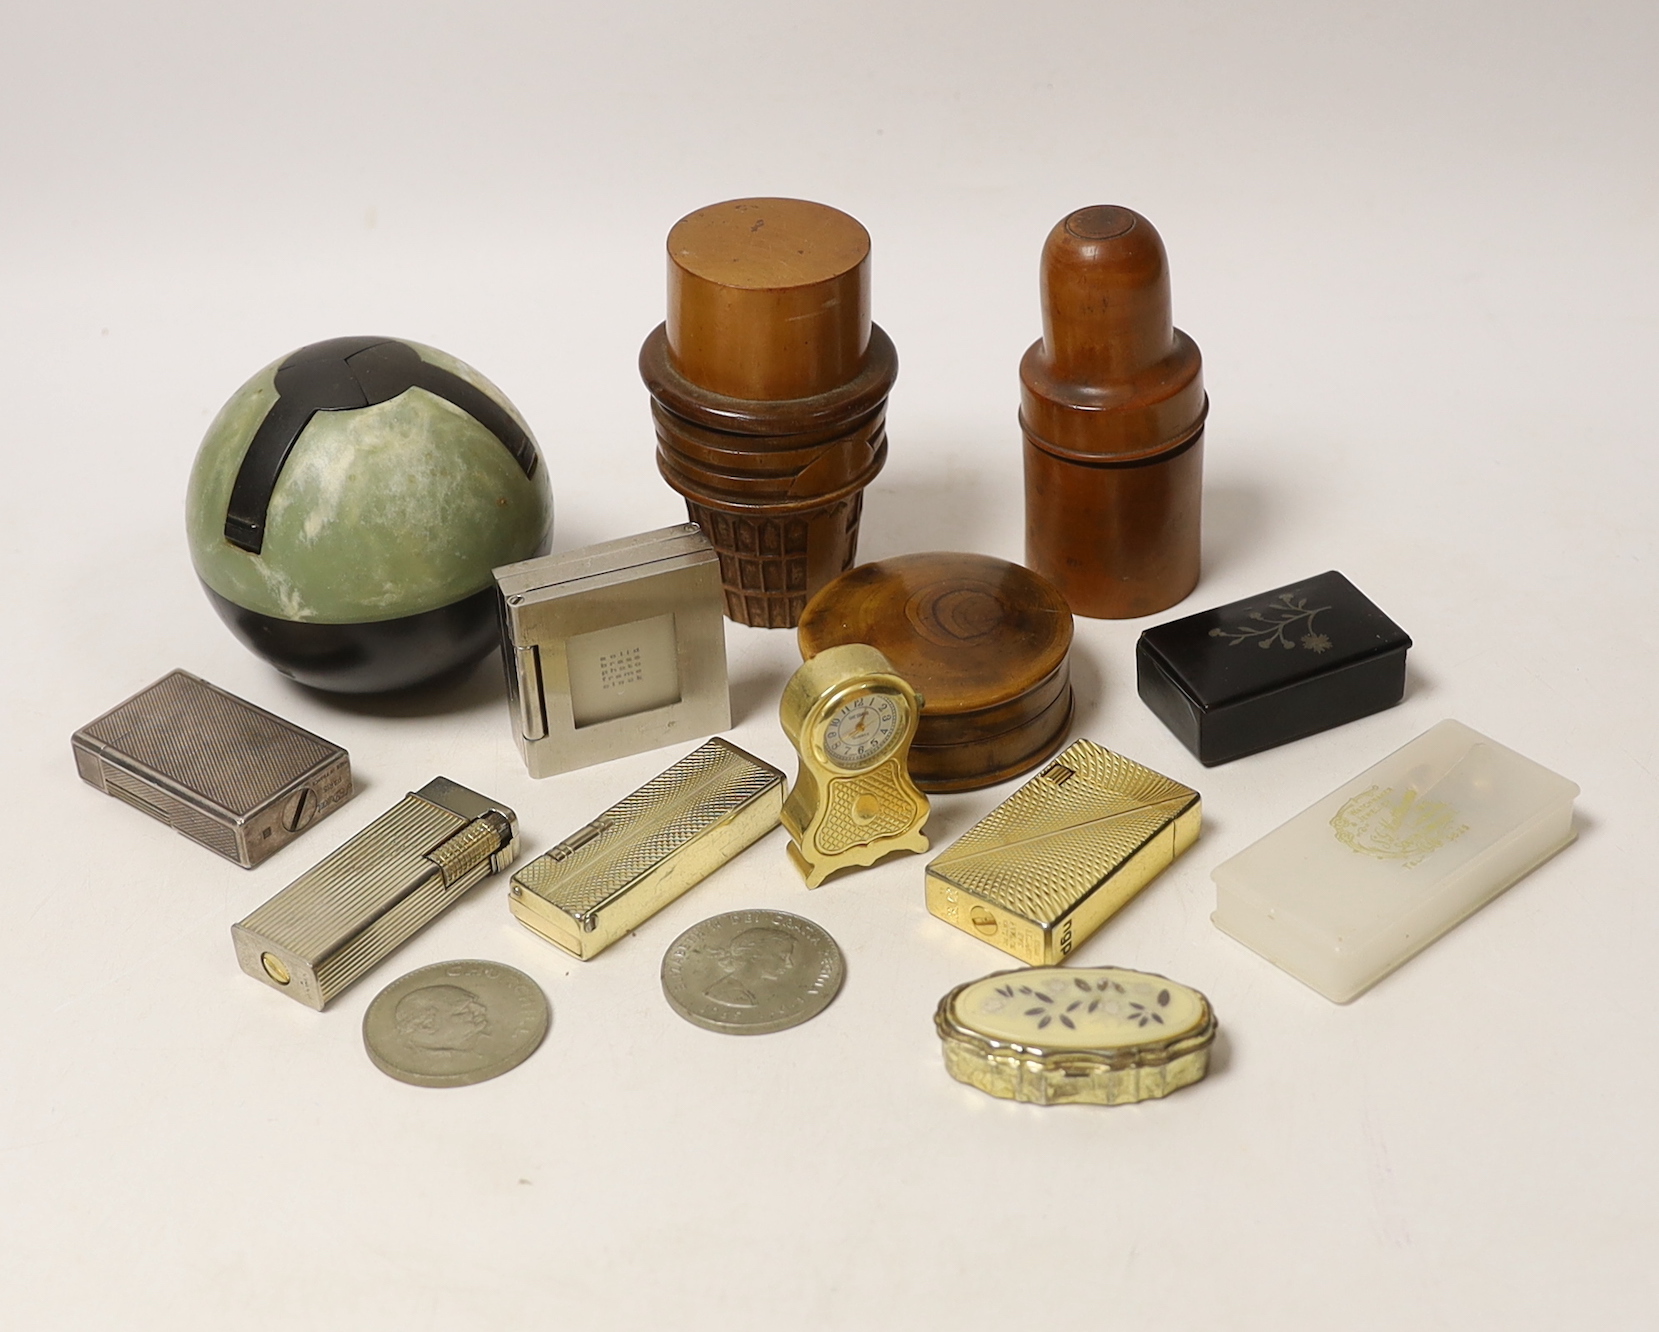 Sundry items including lighters, treen and miniature clocks